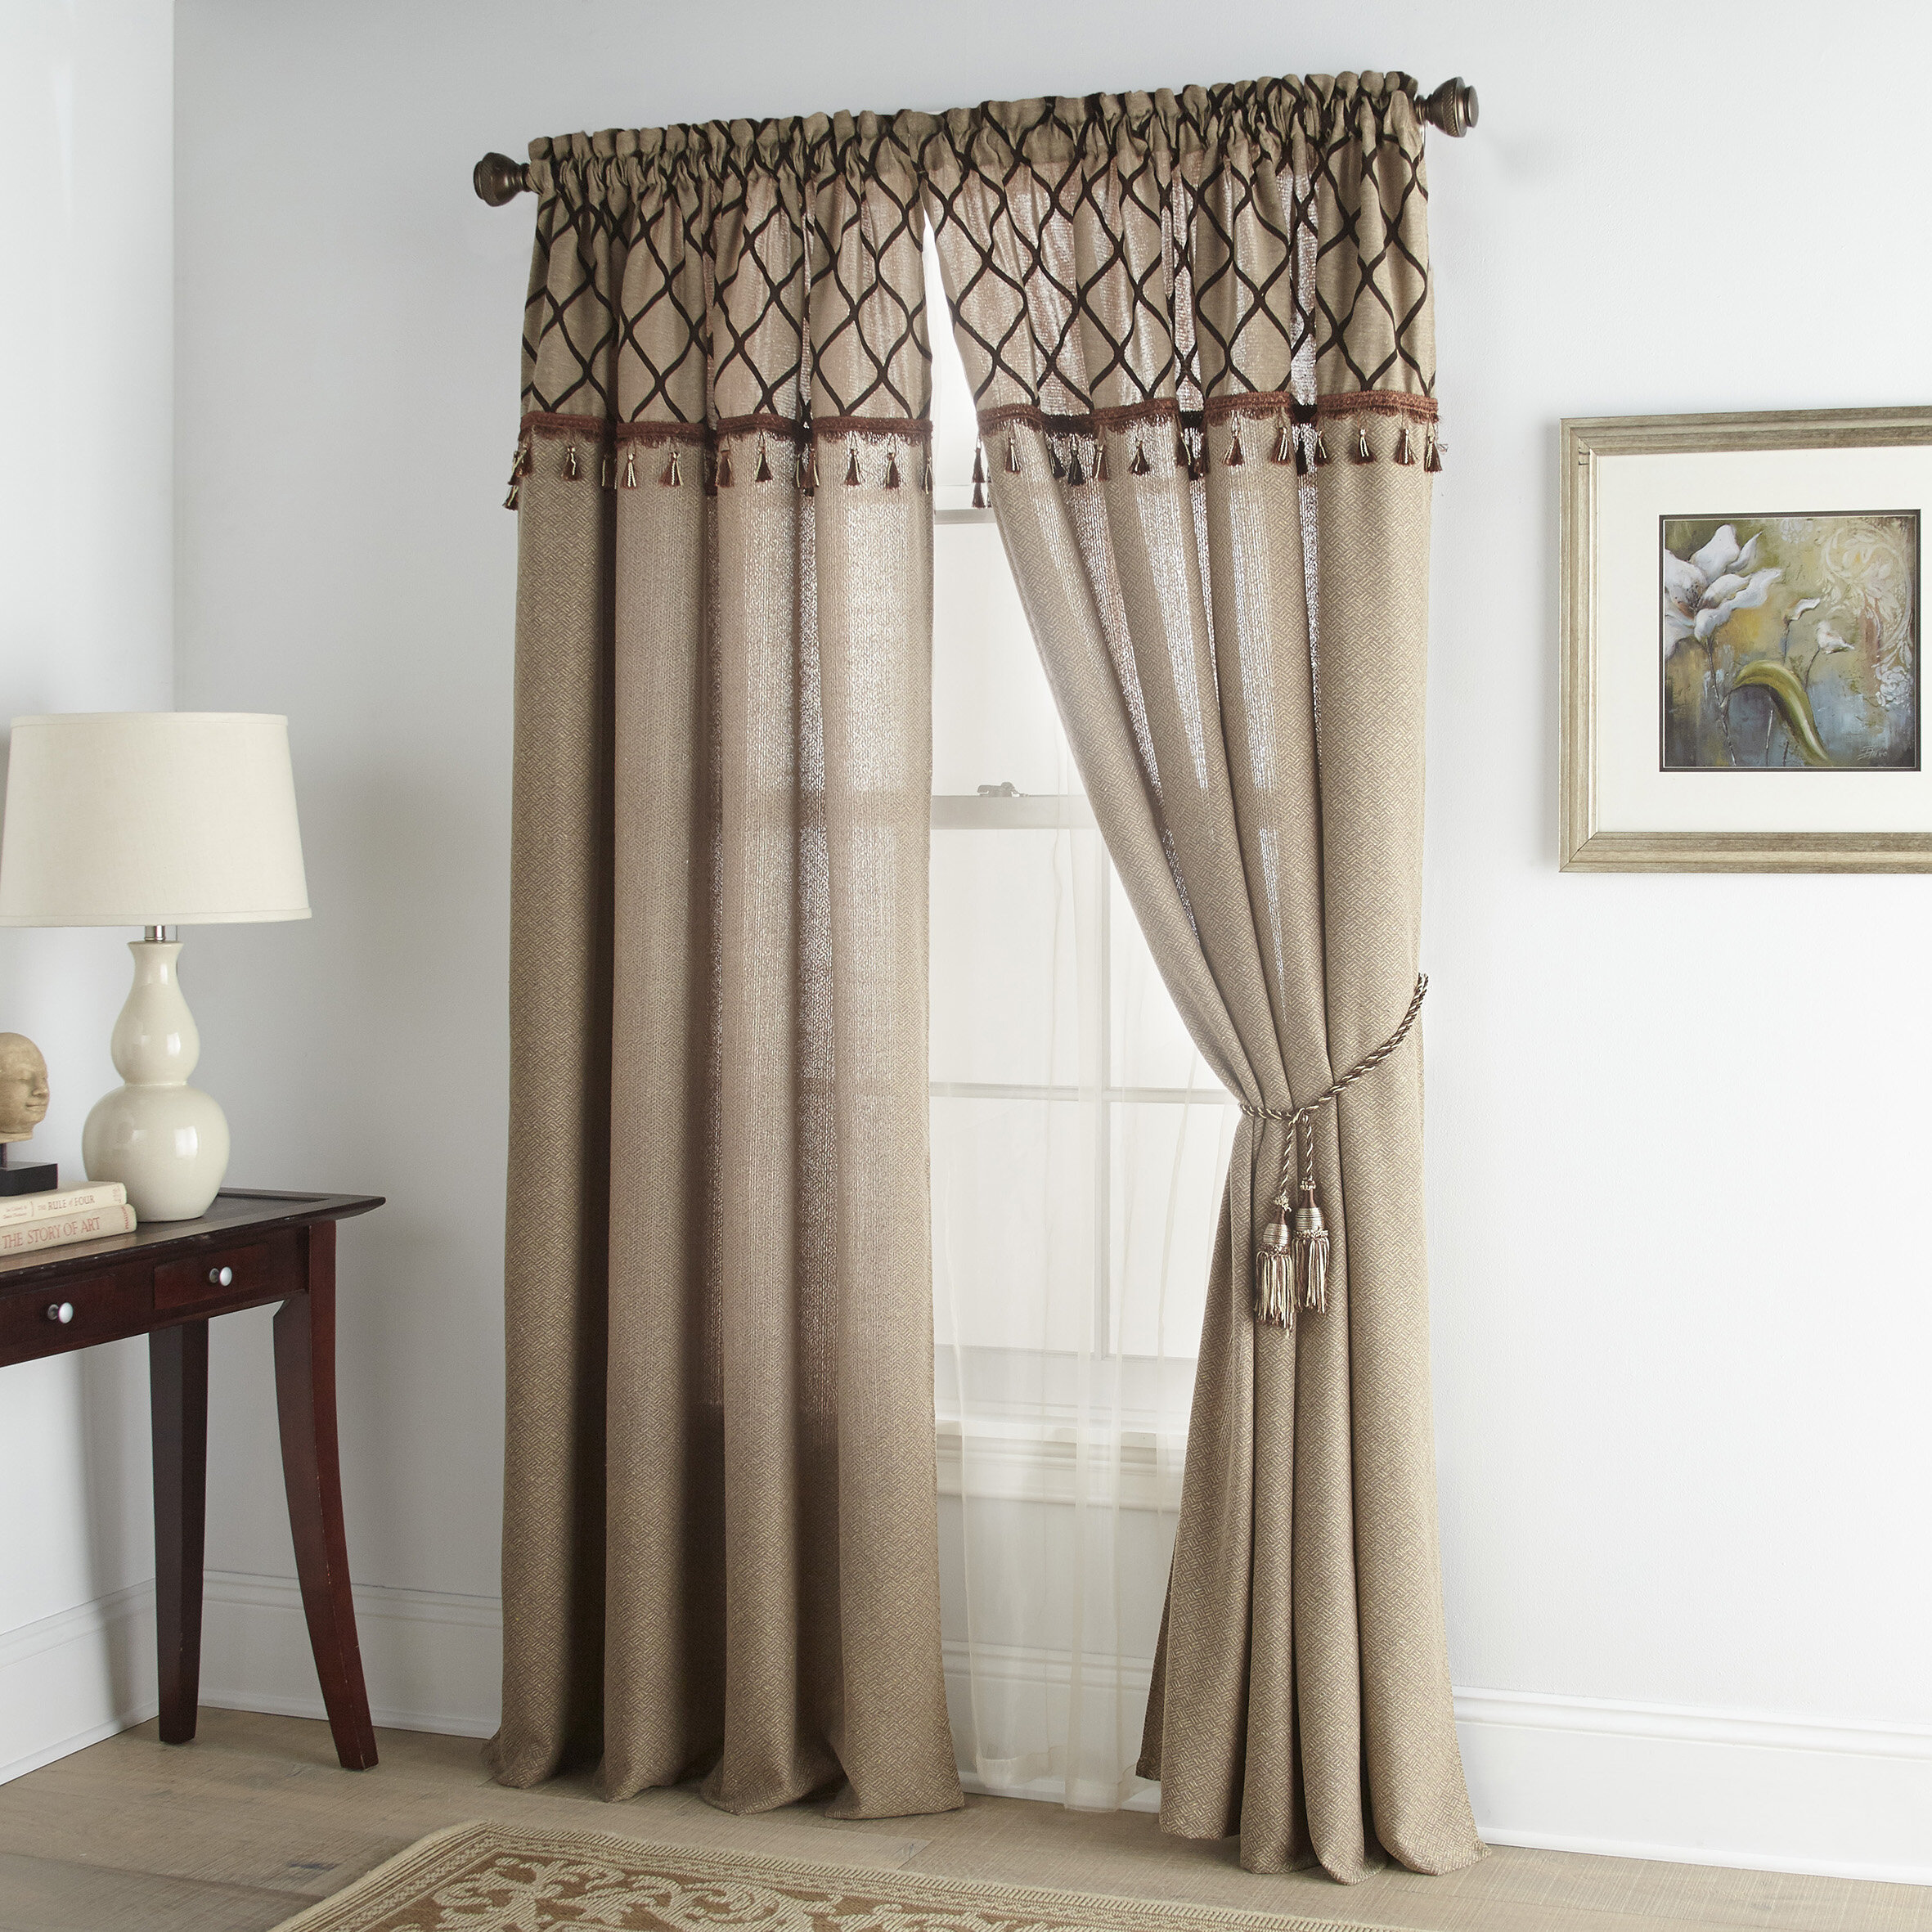 84 x 54 Inch by Lavish Home Chocolate Semi Sheer Grommet Style Curtains Floral Embroidered Pattern Window Curtain Panel for Living Room Bedroom 63-207-84-C 